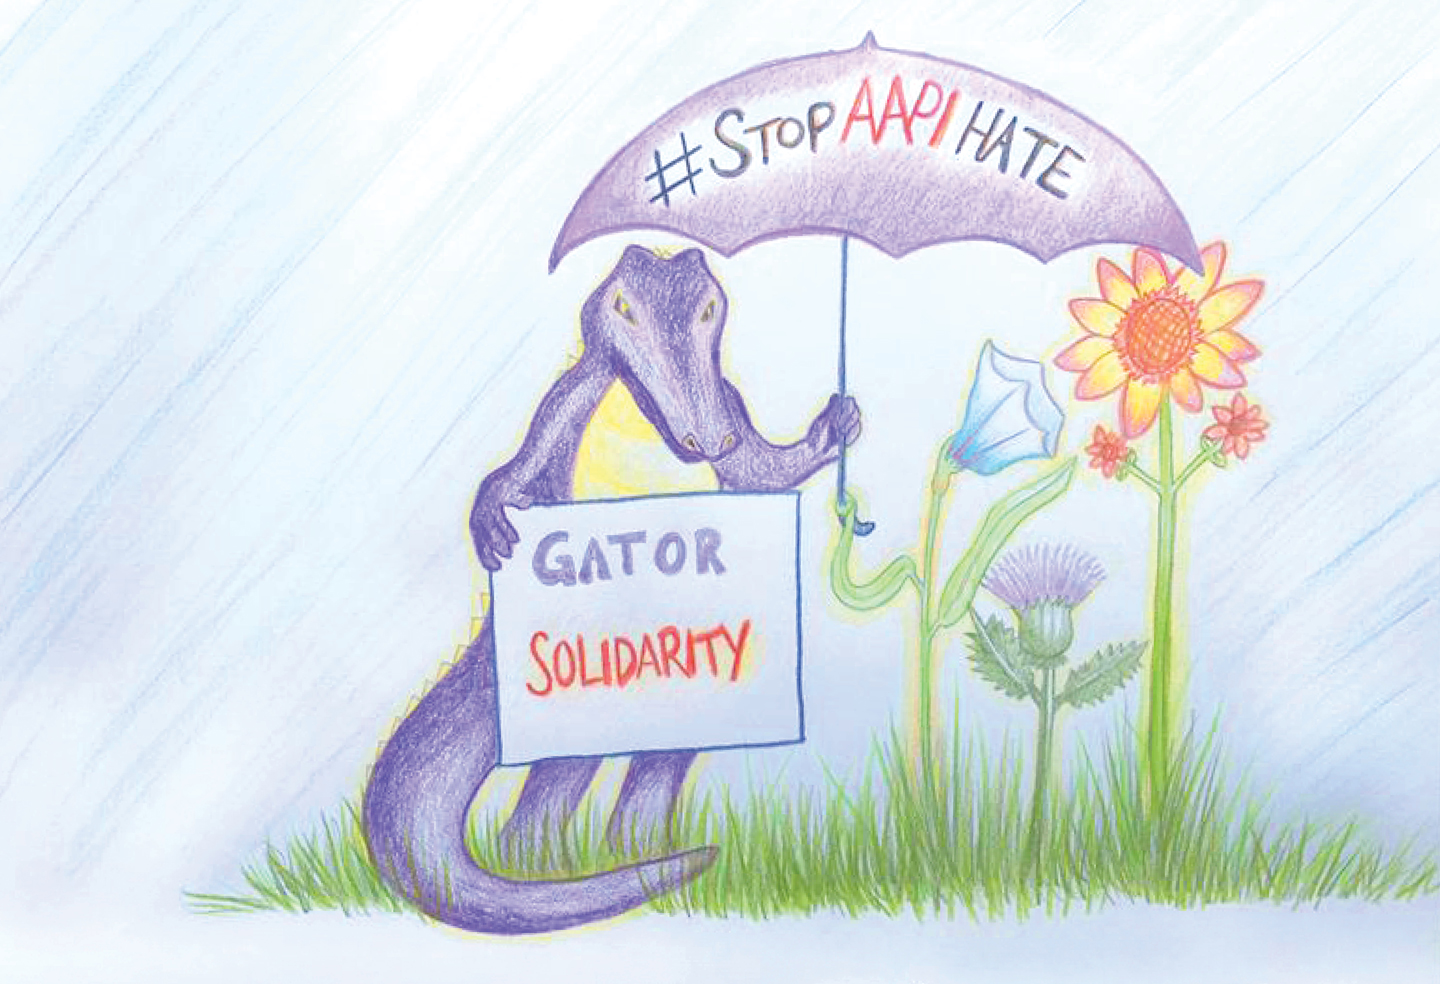 Gator holding a Gator Solidarity sign hand drawn artwork by Wei Ming